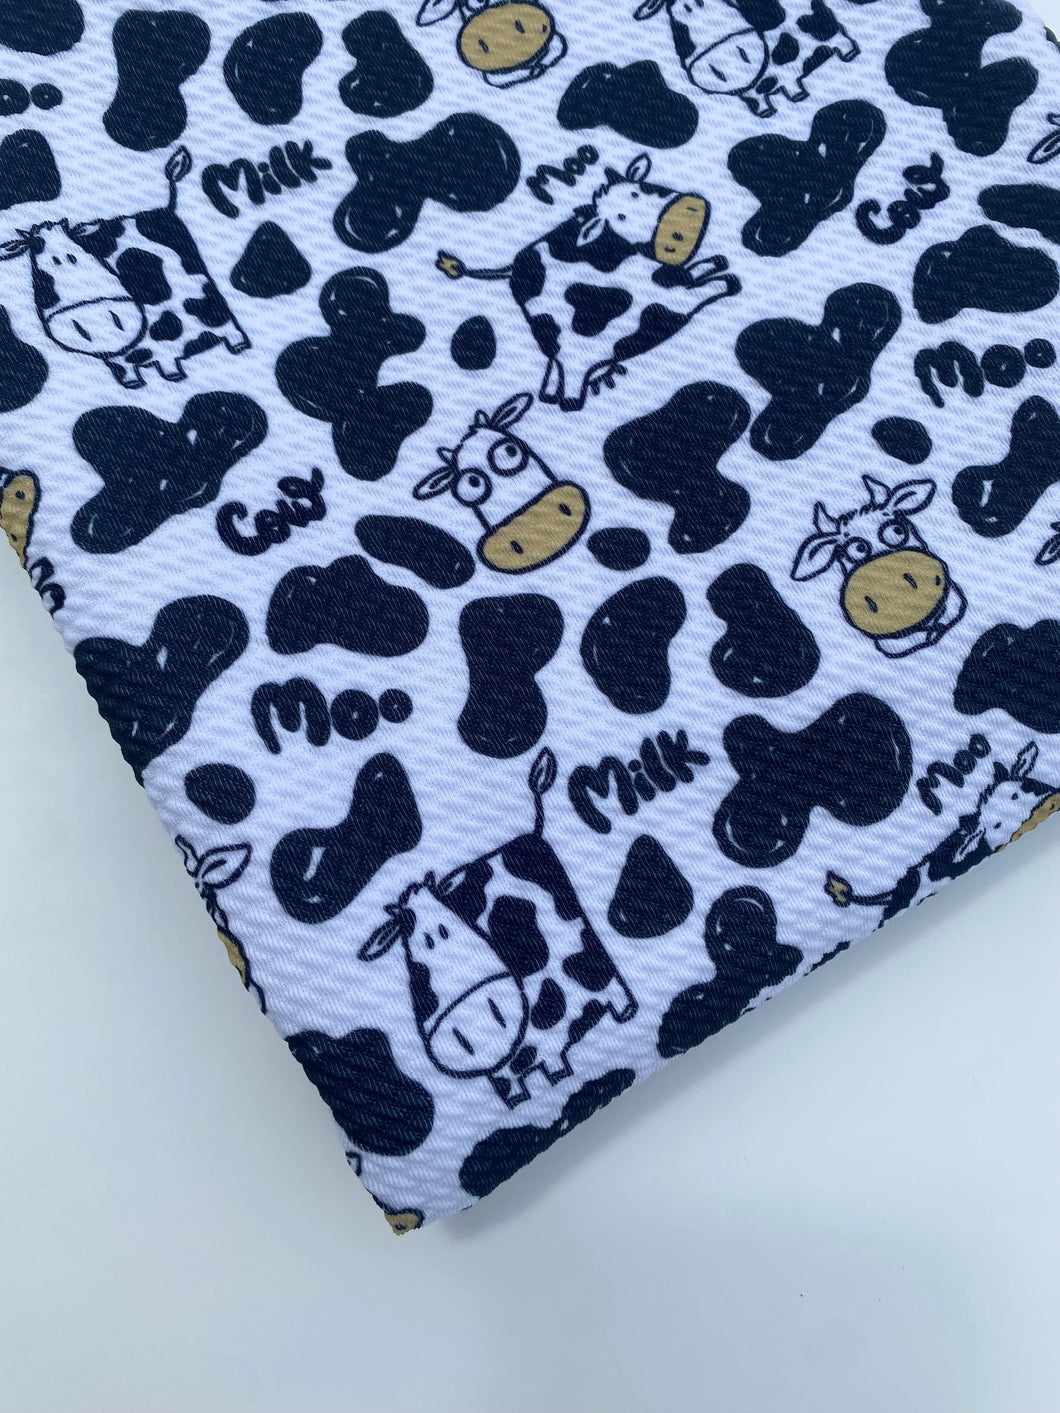 Ready to Ship Bullet fabric Milk Does A Body Good Cow Animals makes great bows, head wraps, bummies, and more.